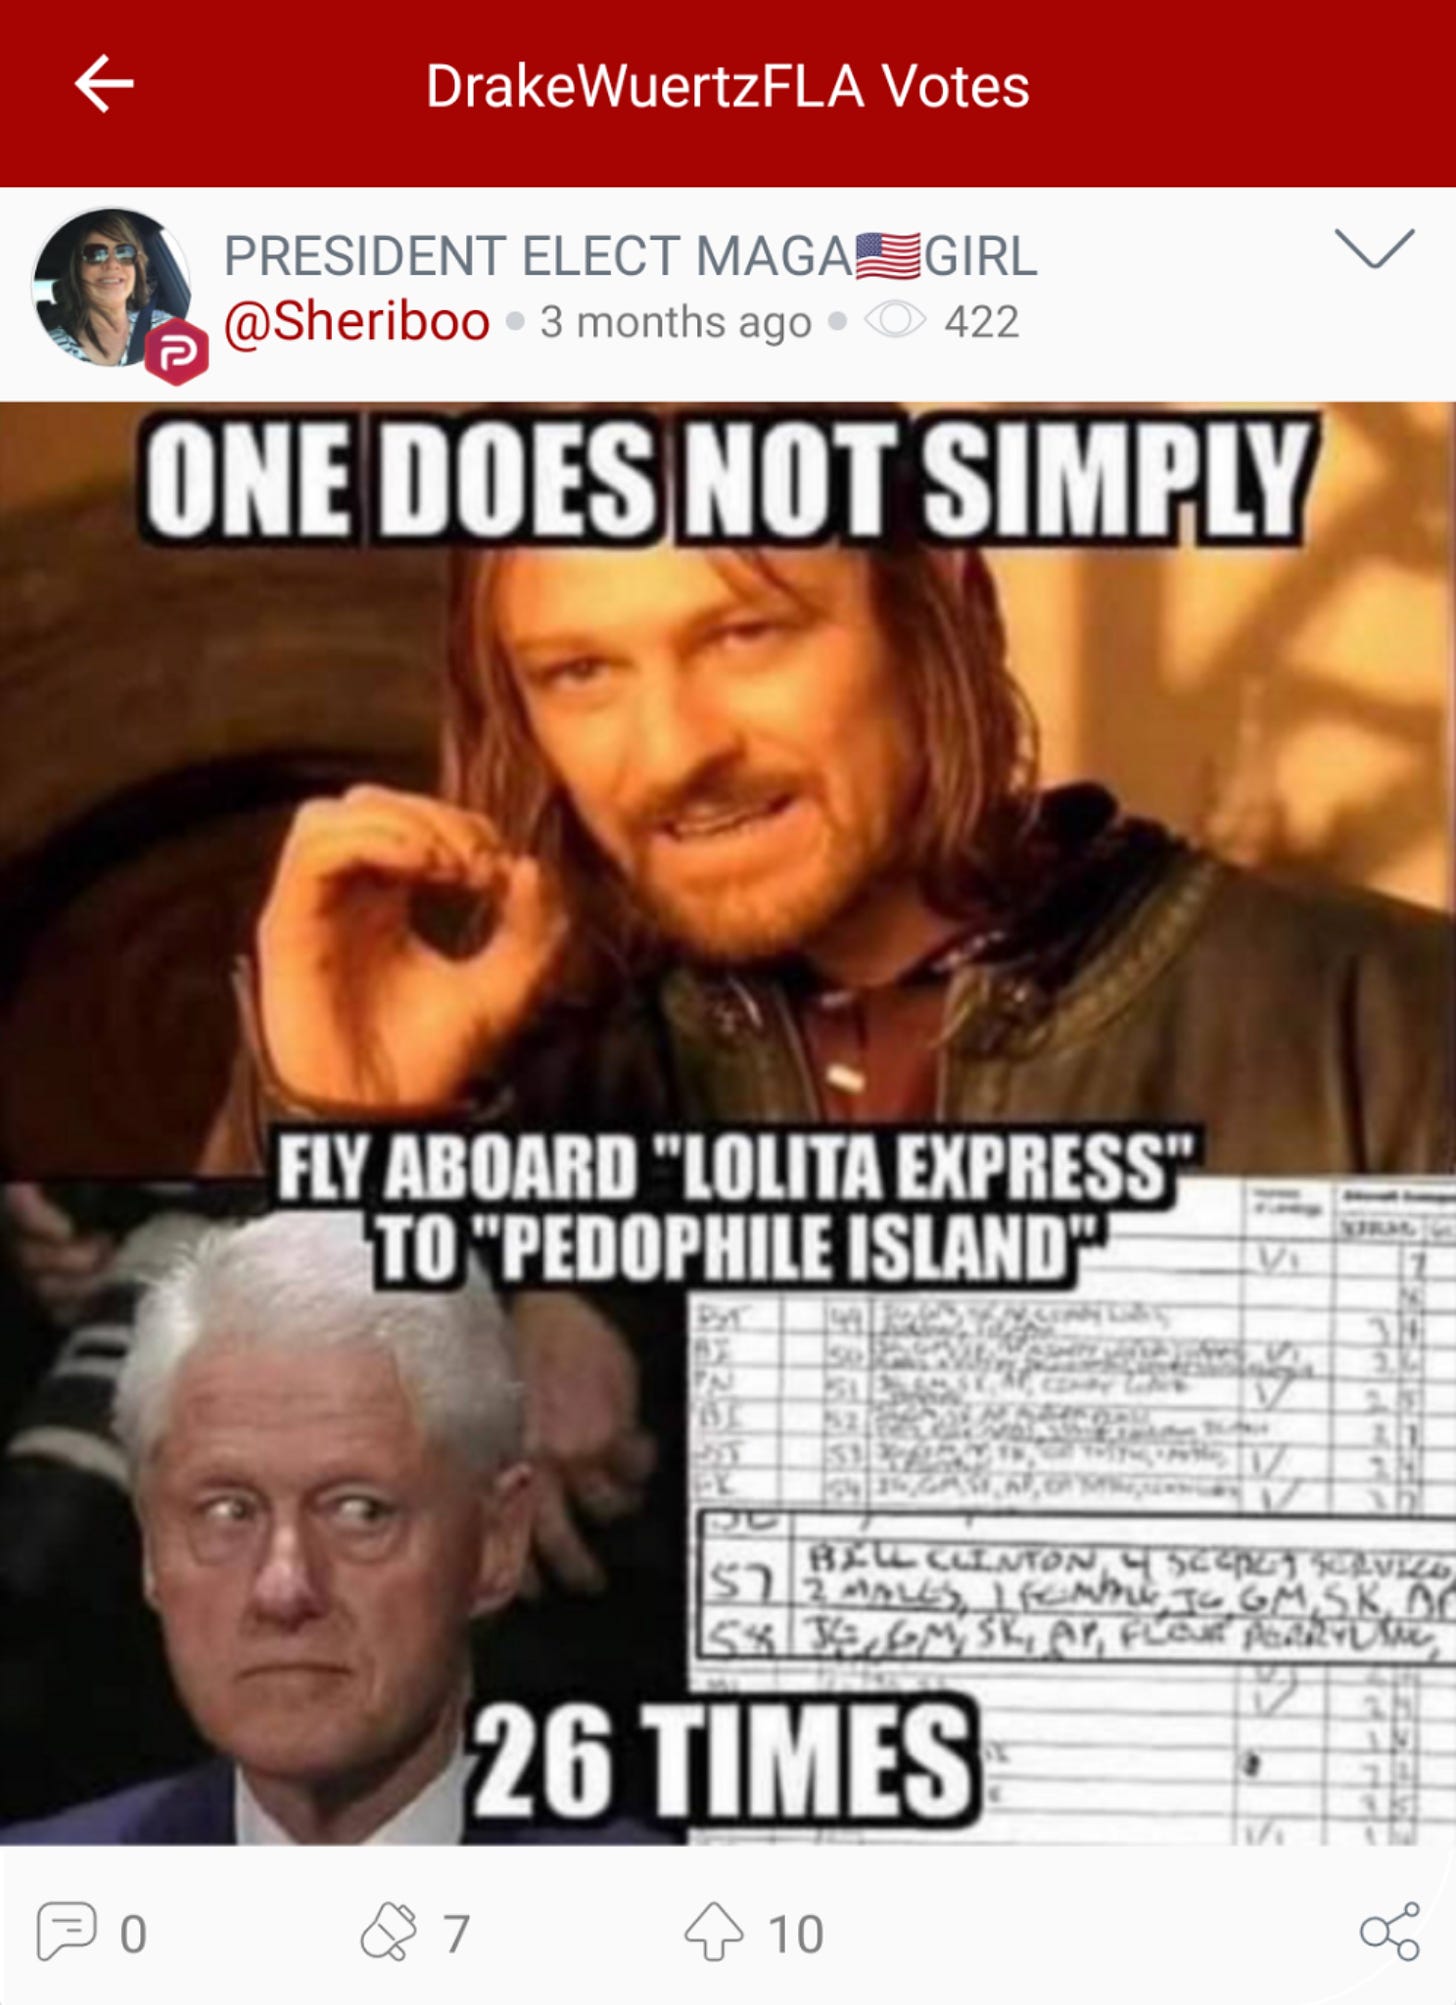 @DrakeWuertzFLA “votes” MAGA Girl’s Parler post of a meme about Bill Clinton flying on the “Lolita Express.” (Image: Parler screenshot.)